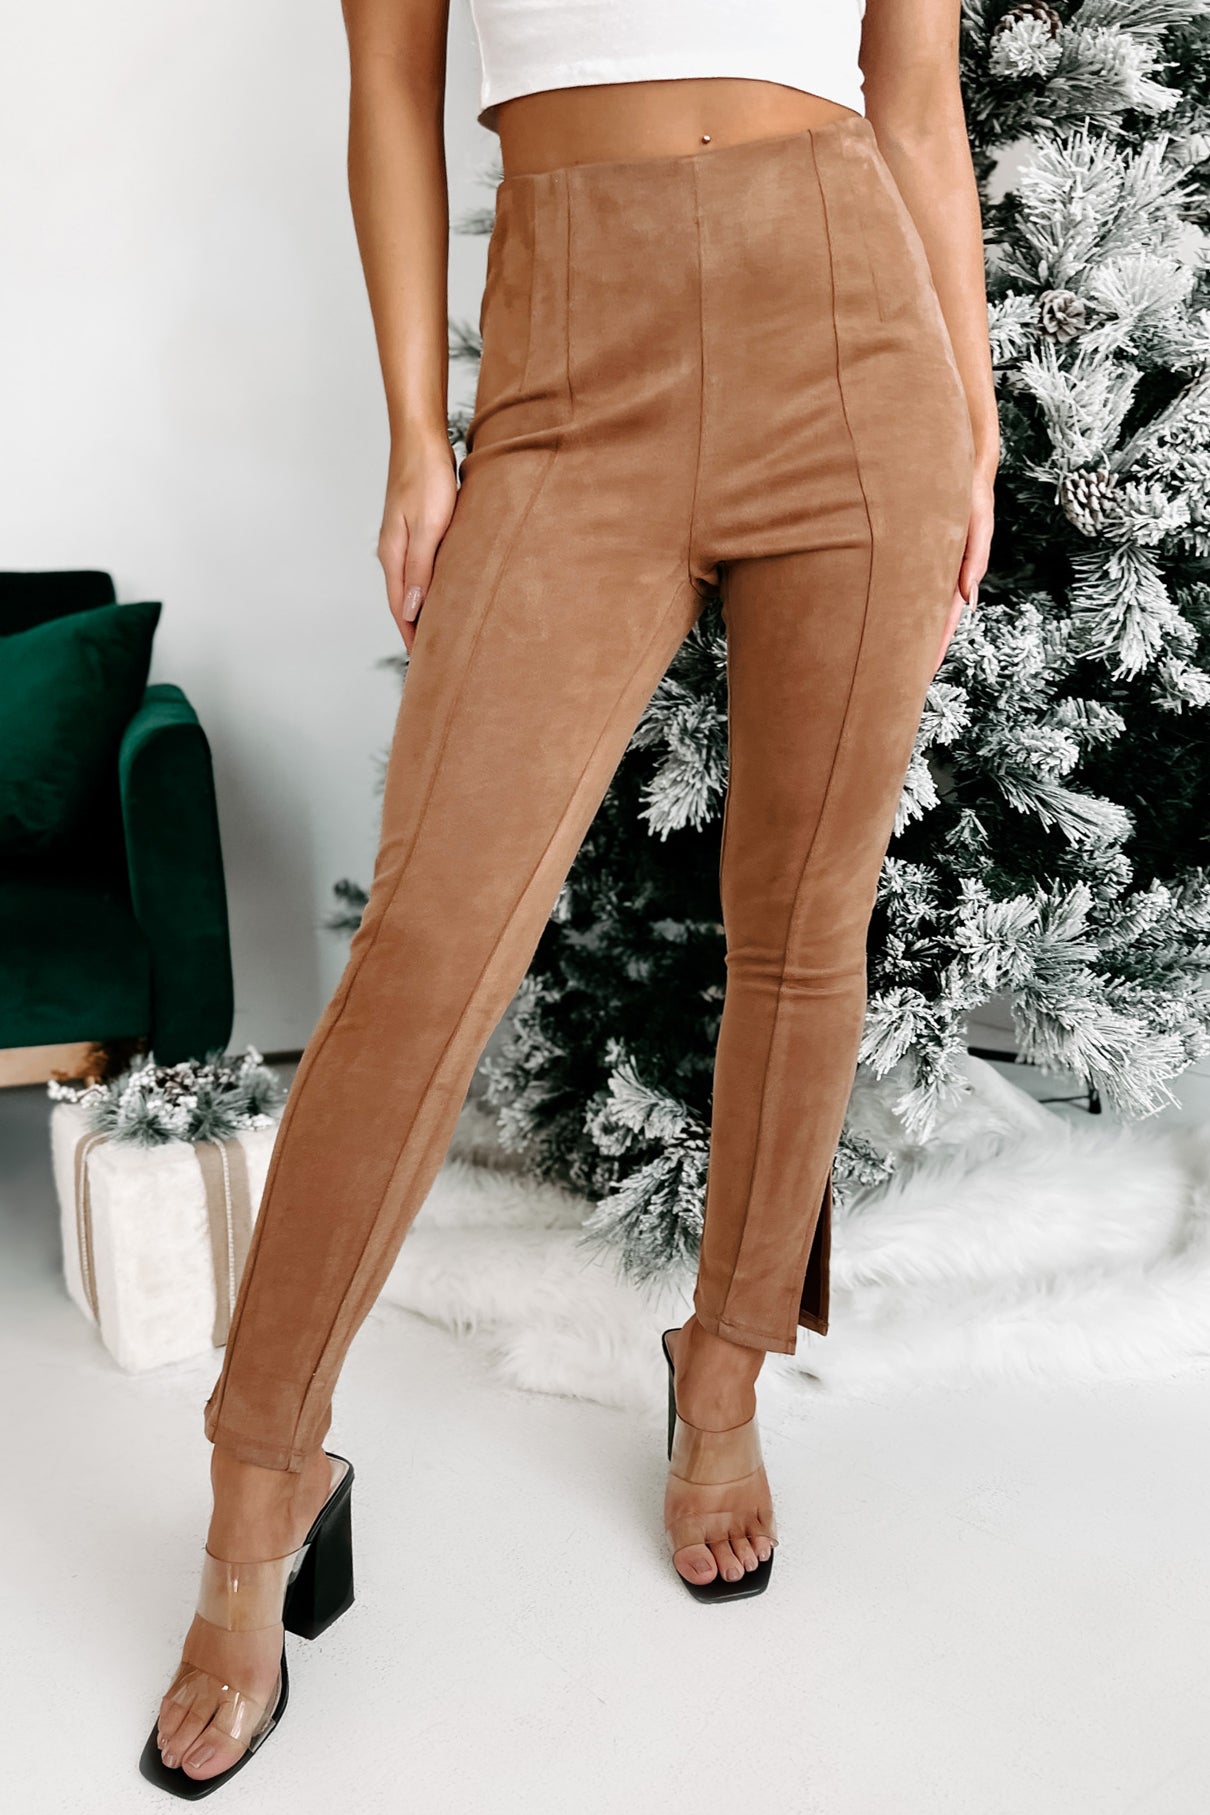 Women's clothing fashion, My superb straight pants camel suede & split